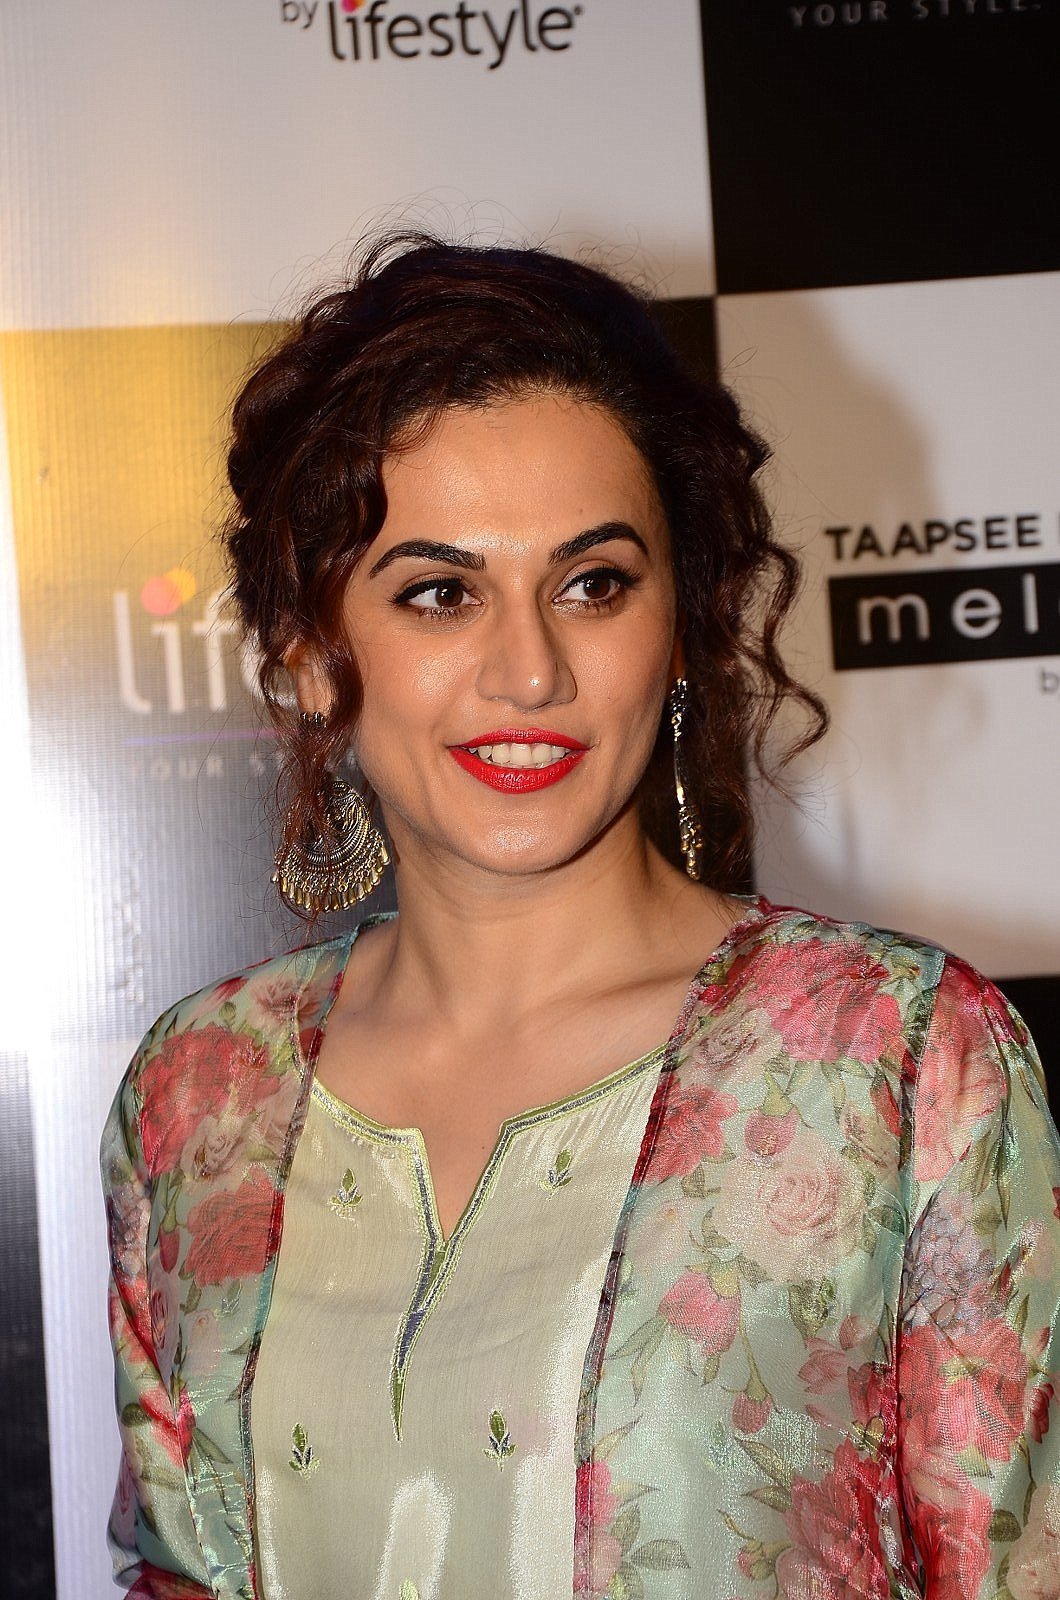 Taapsee Pannu - Photos: Announcement Of New Brand Ambassador For Melange by Lifestyle | Picture 1600397